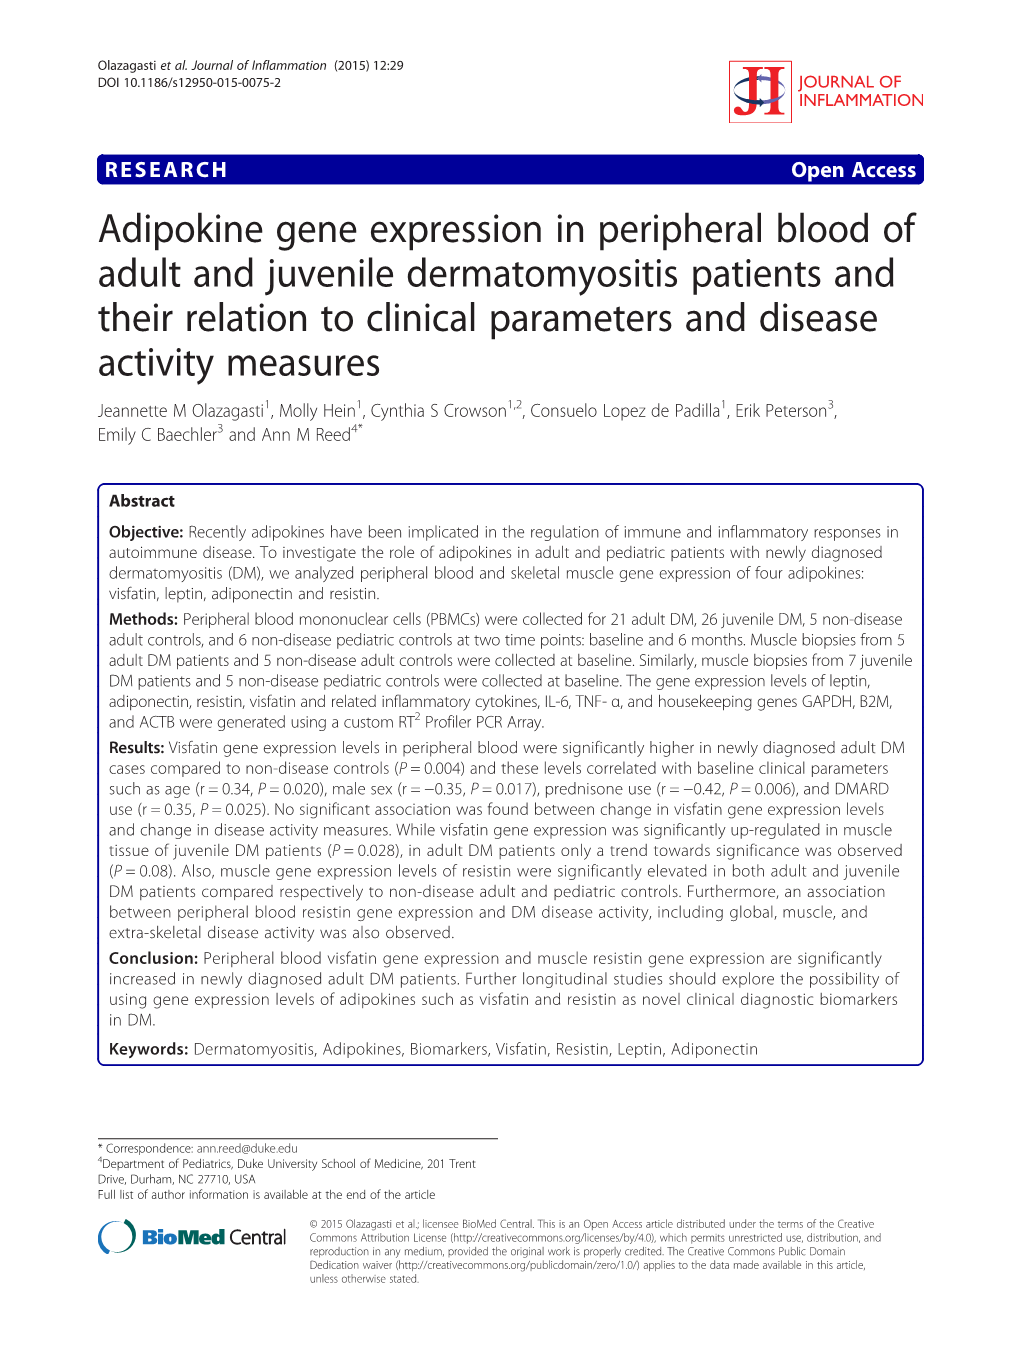 Adipokine Gene Expression in Peripheral Blood of Adult And